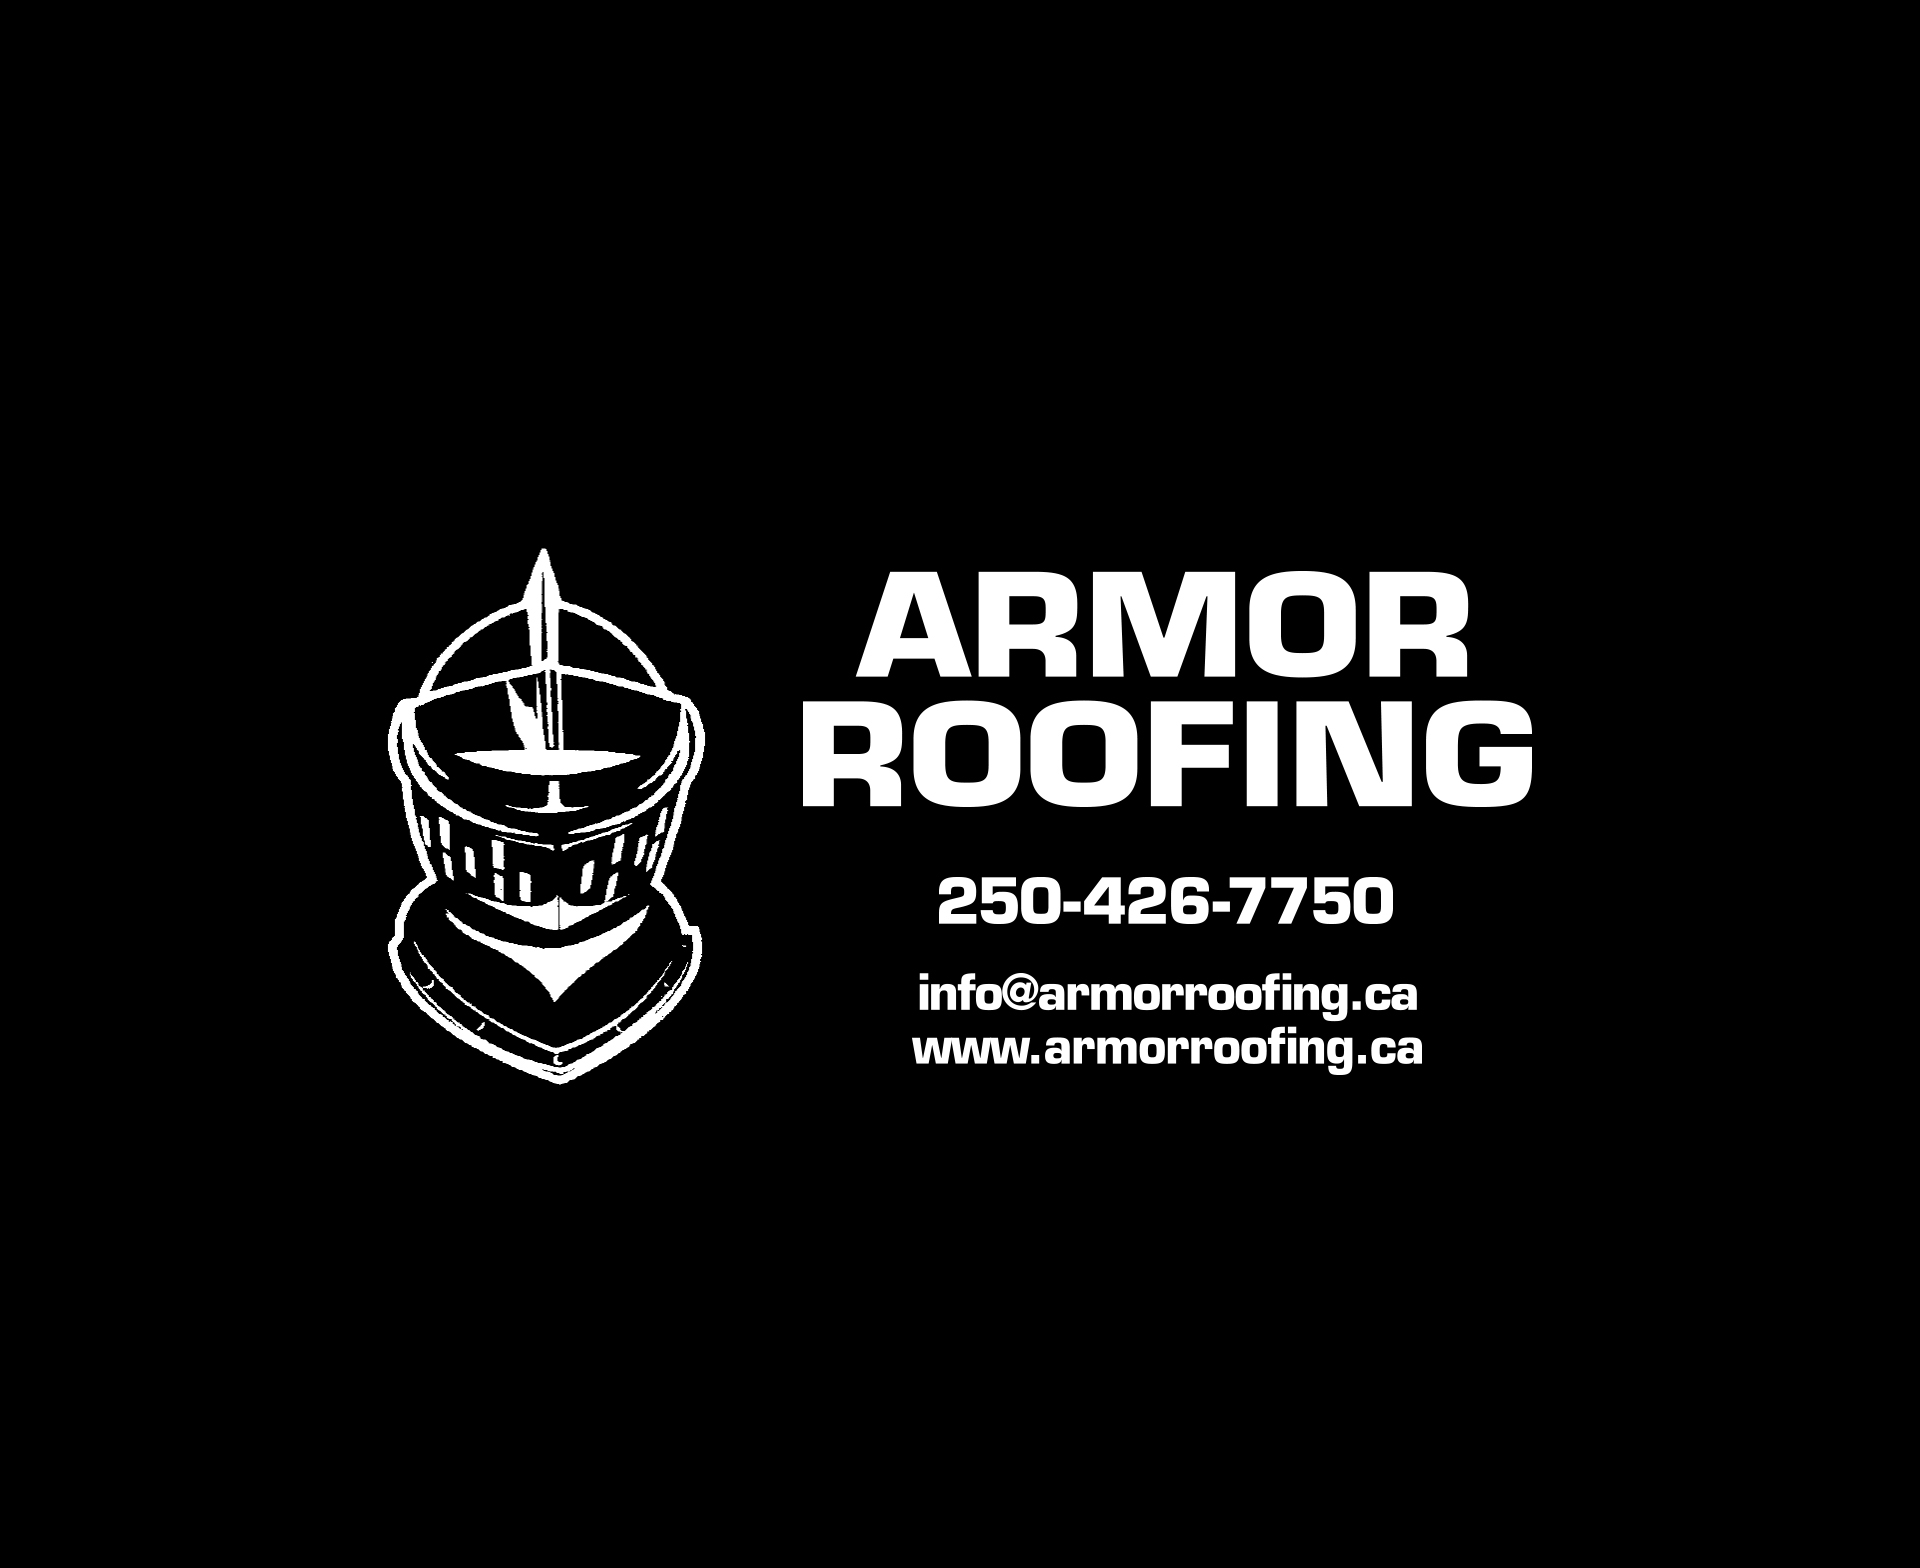 Armor Roofing logo 